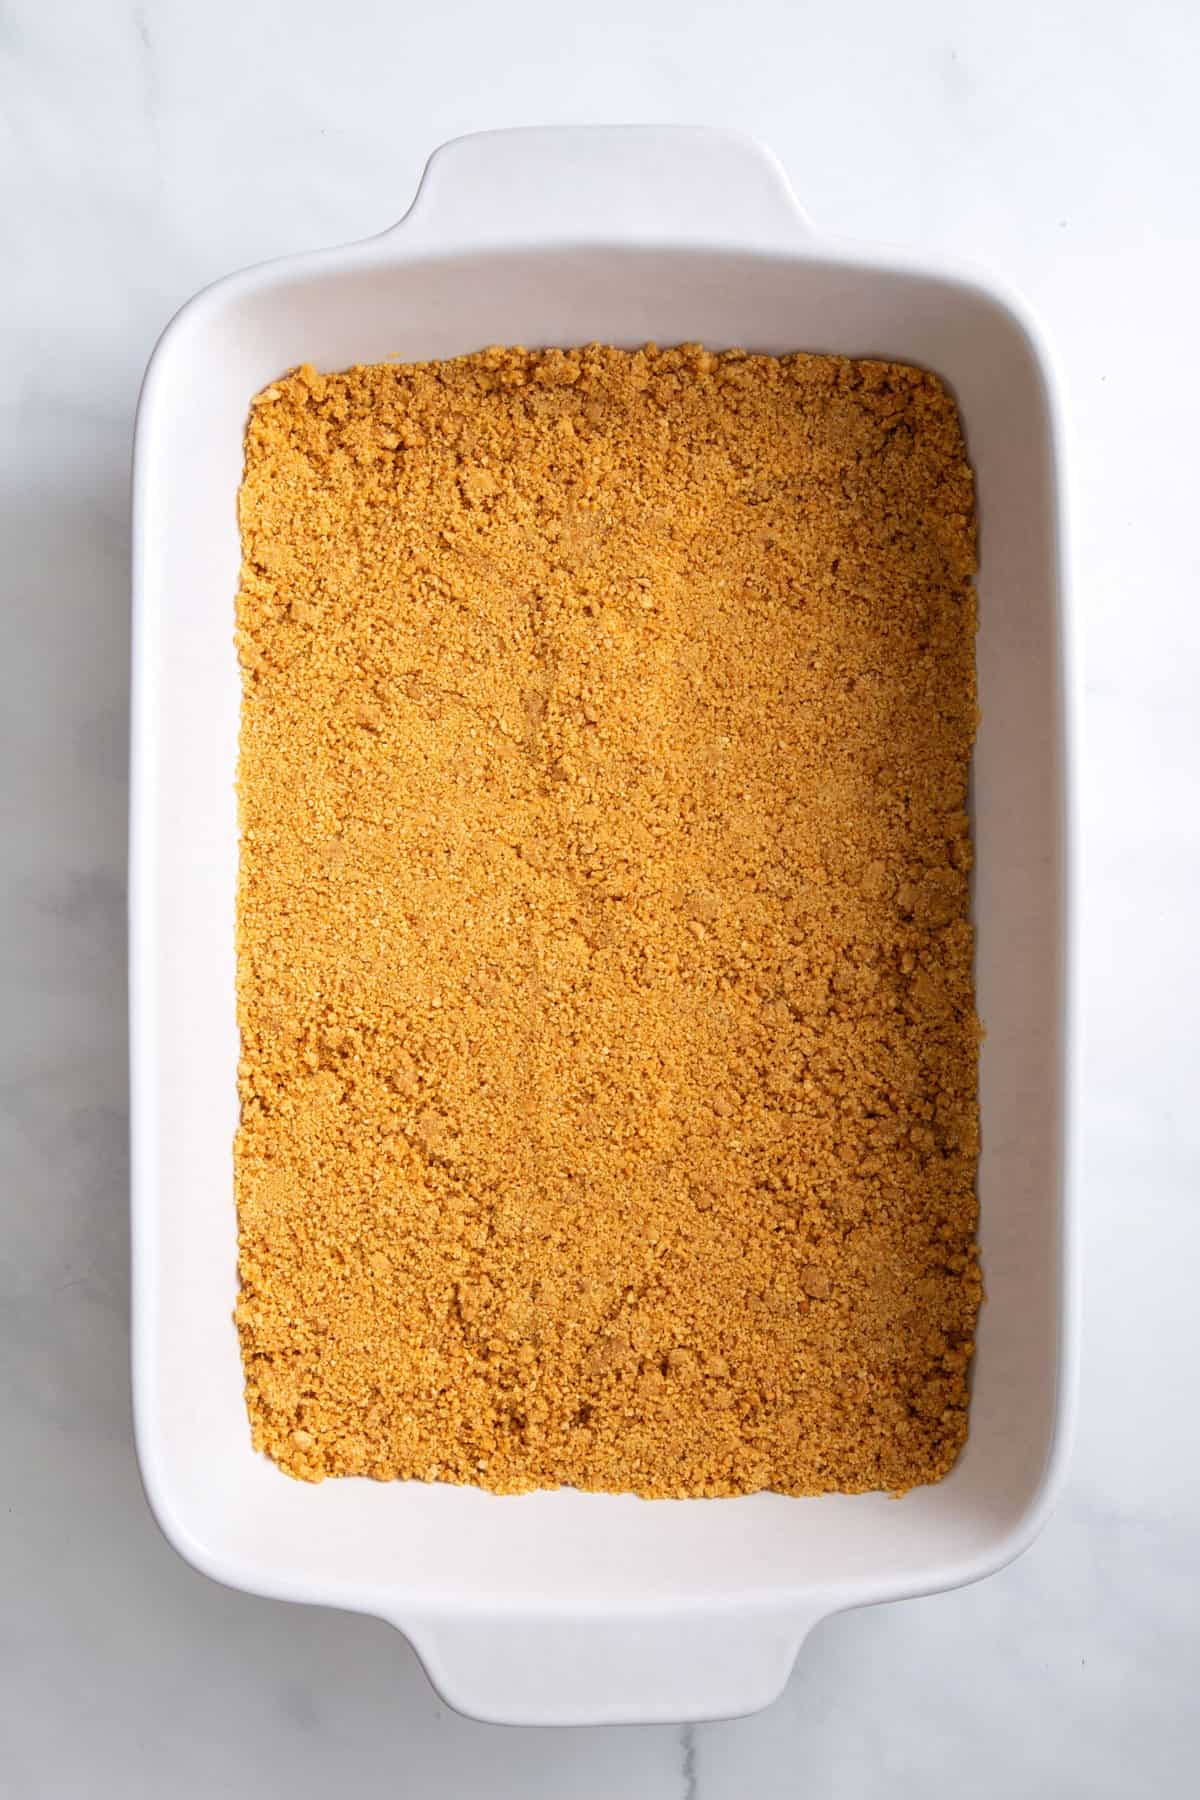 graham cracker crumb and melted butter mixture layered at the bottom of a 9x13 baking dish